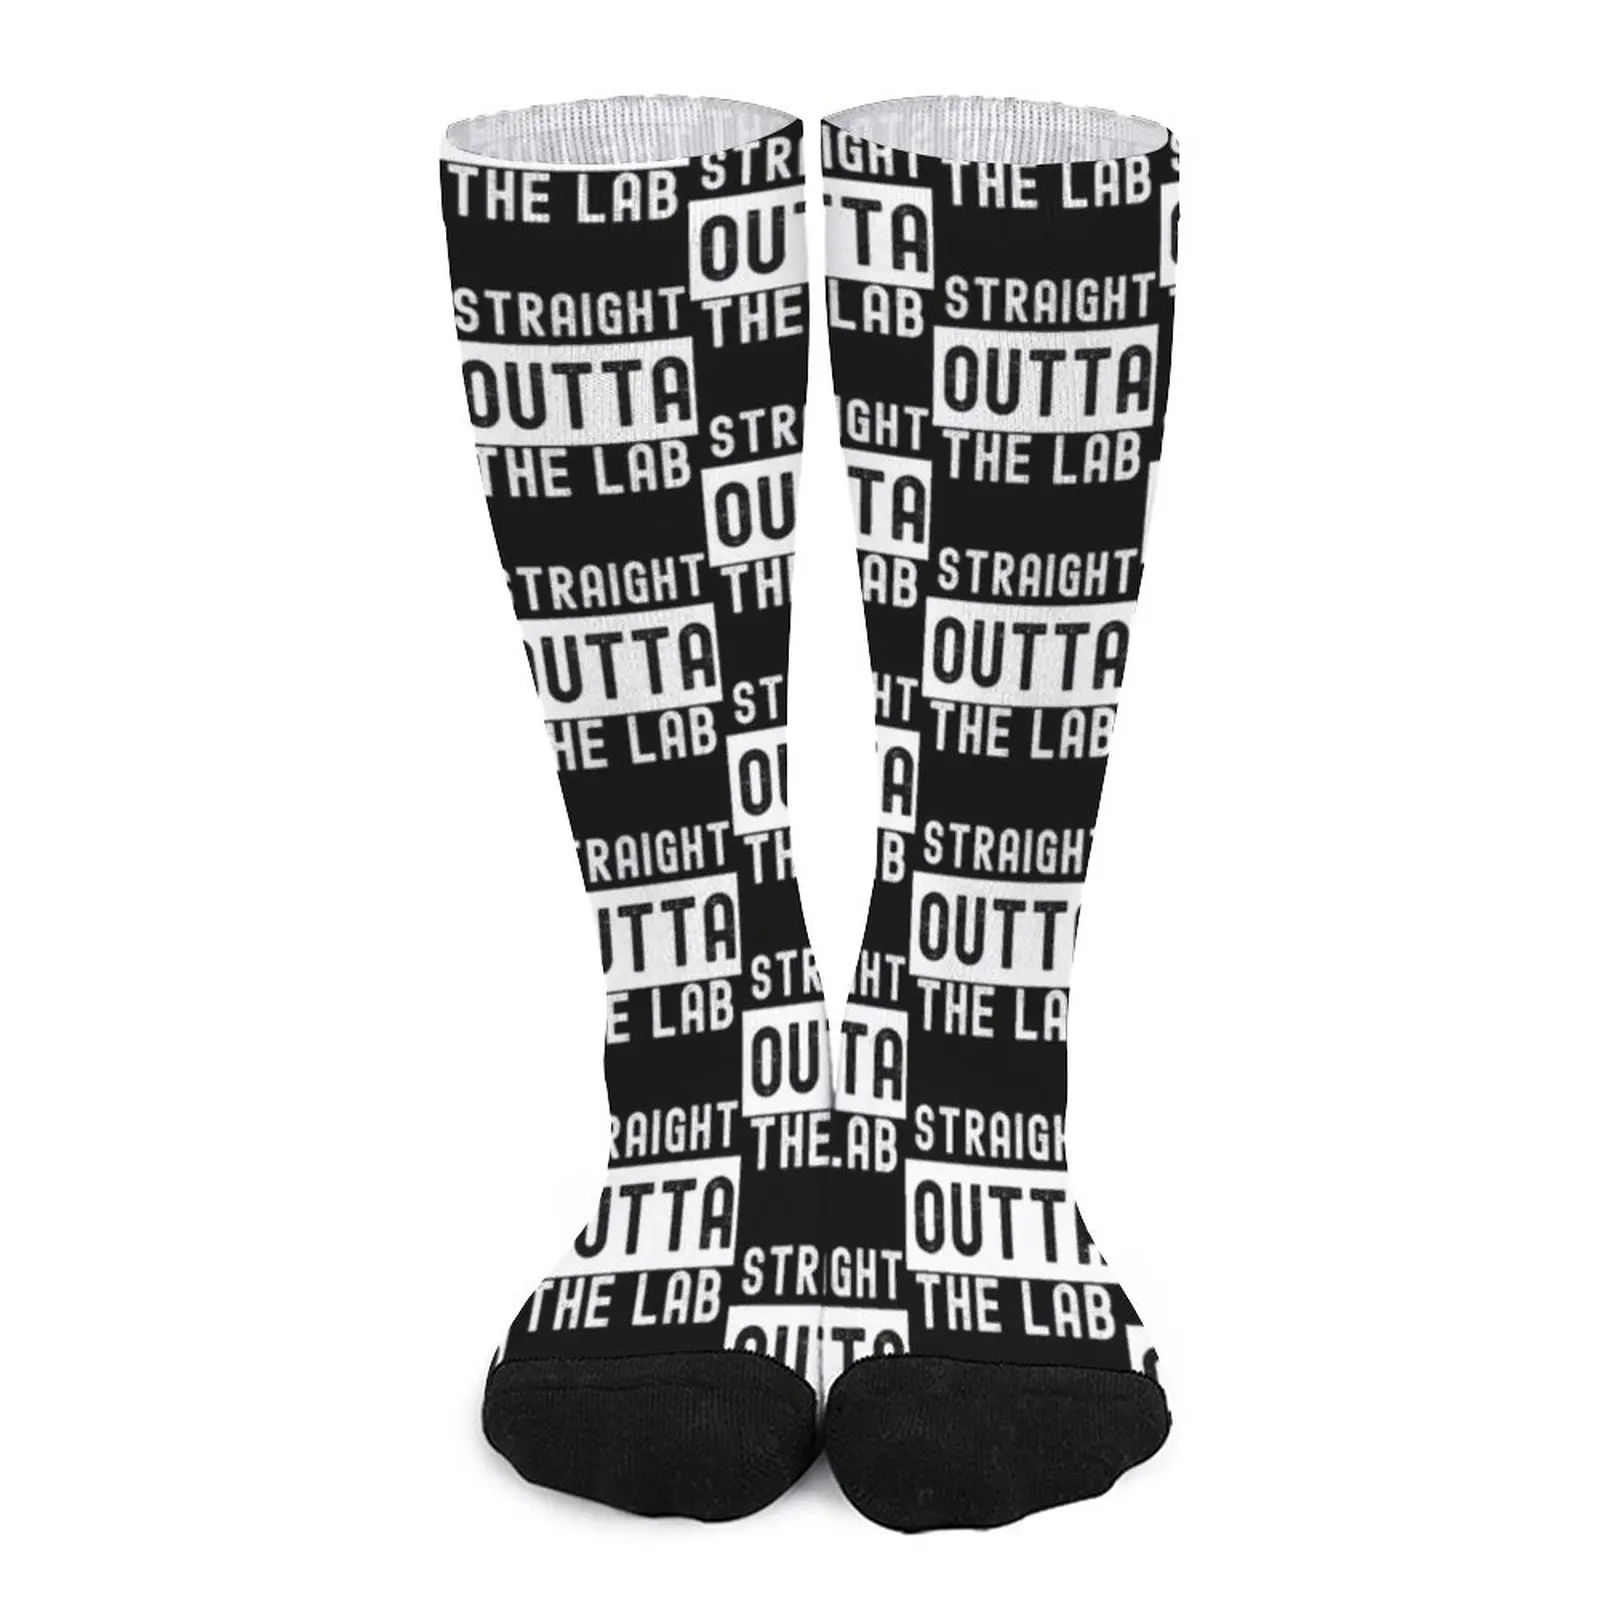 STRAIGHT OUTTA THE LAB LABLIFE Medical Laboratory Scientist FUNNY Socks Sports socks sports socks men cool socks Men gift 12pcs straight handle cheering poms cheerleading kit cheer props for performance competition cheering sports events random styl